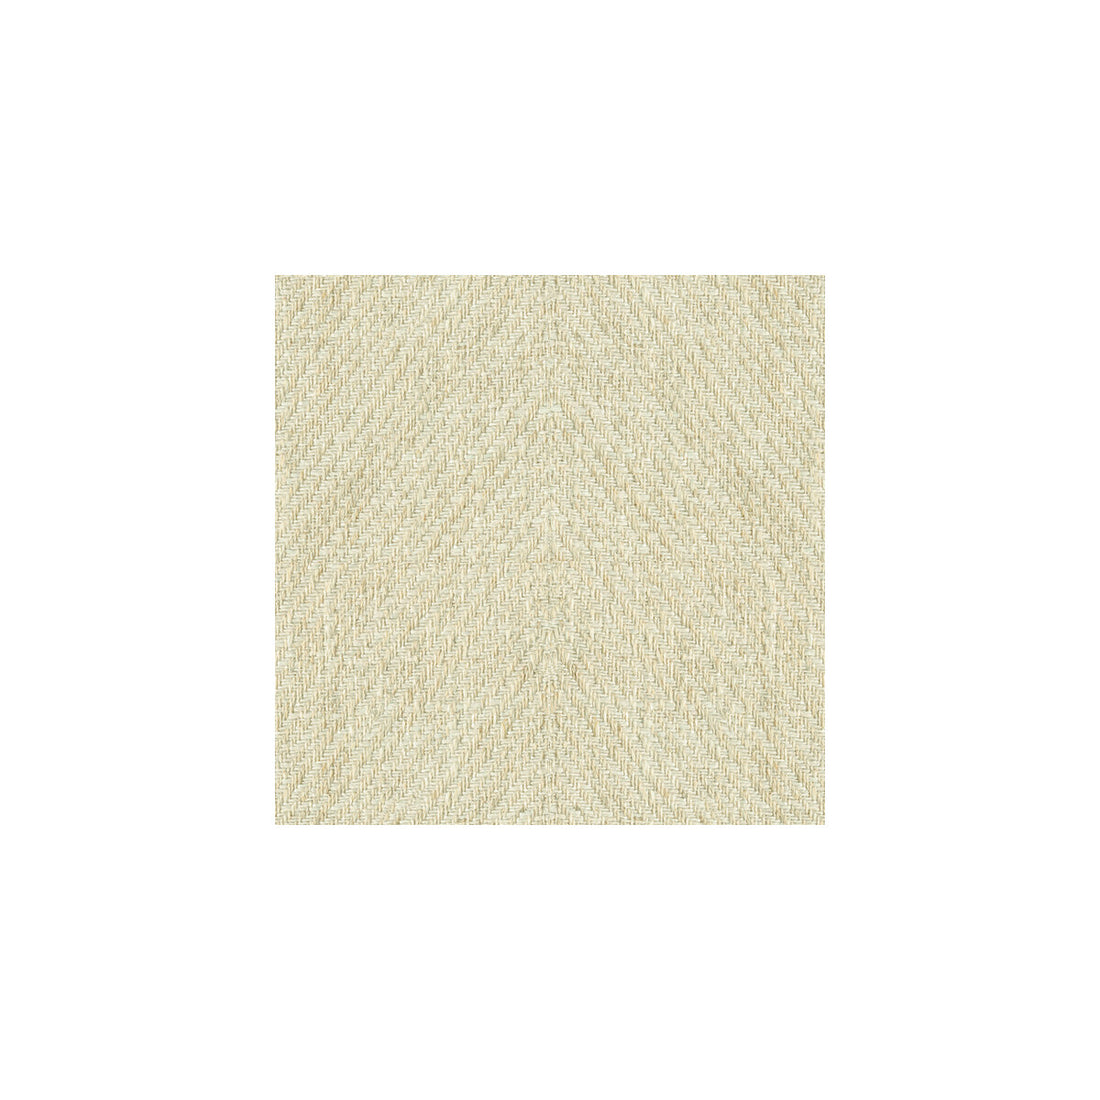 Soft Structure fabric in sand color - pattern 31212.16.0 - by Kravet Couture in the Nomad Chic collection